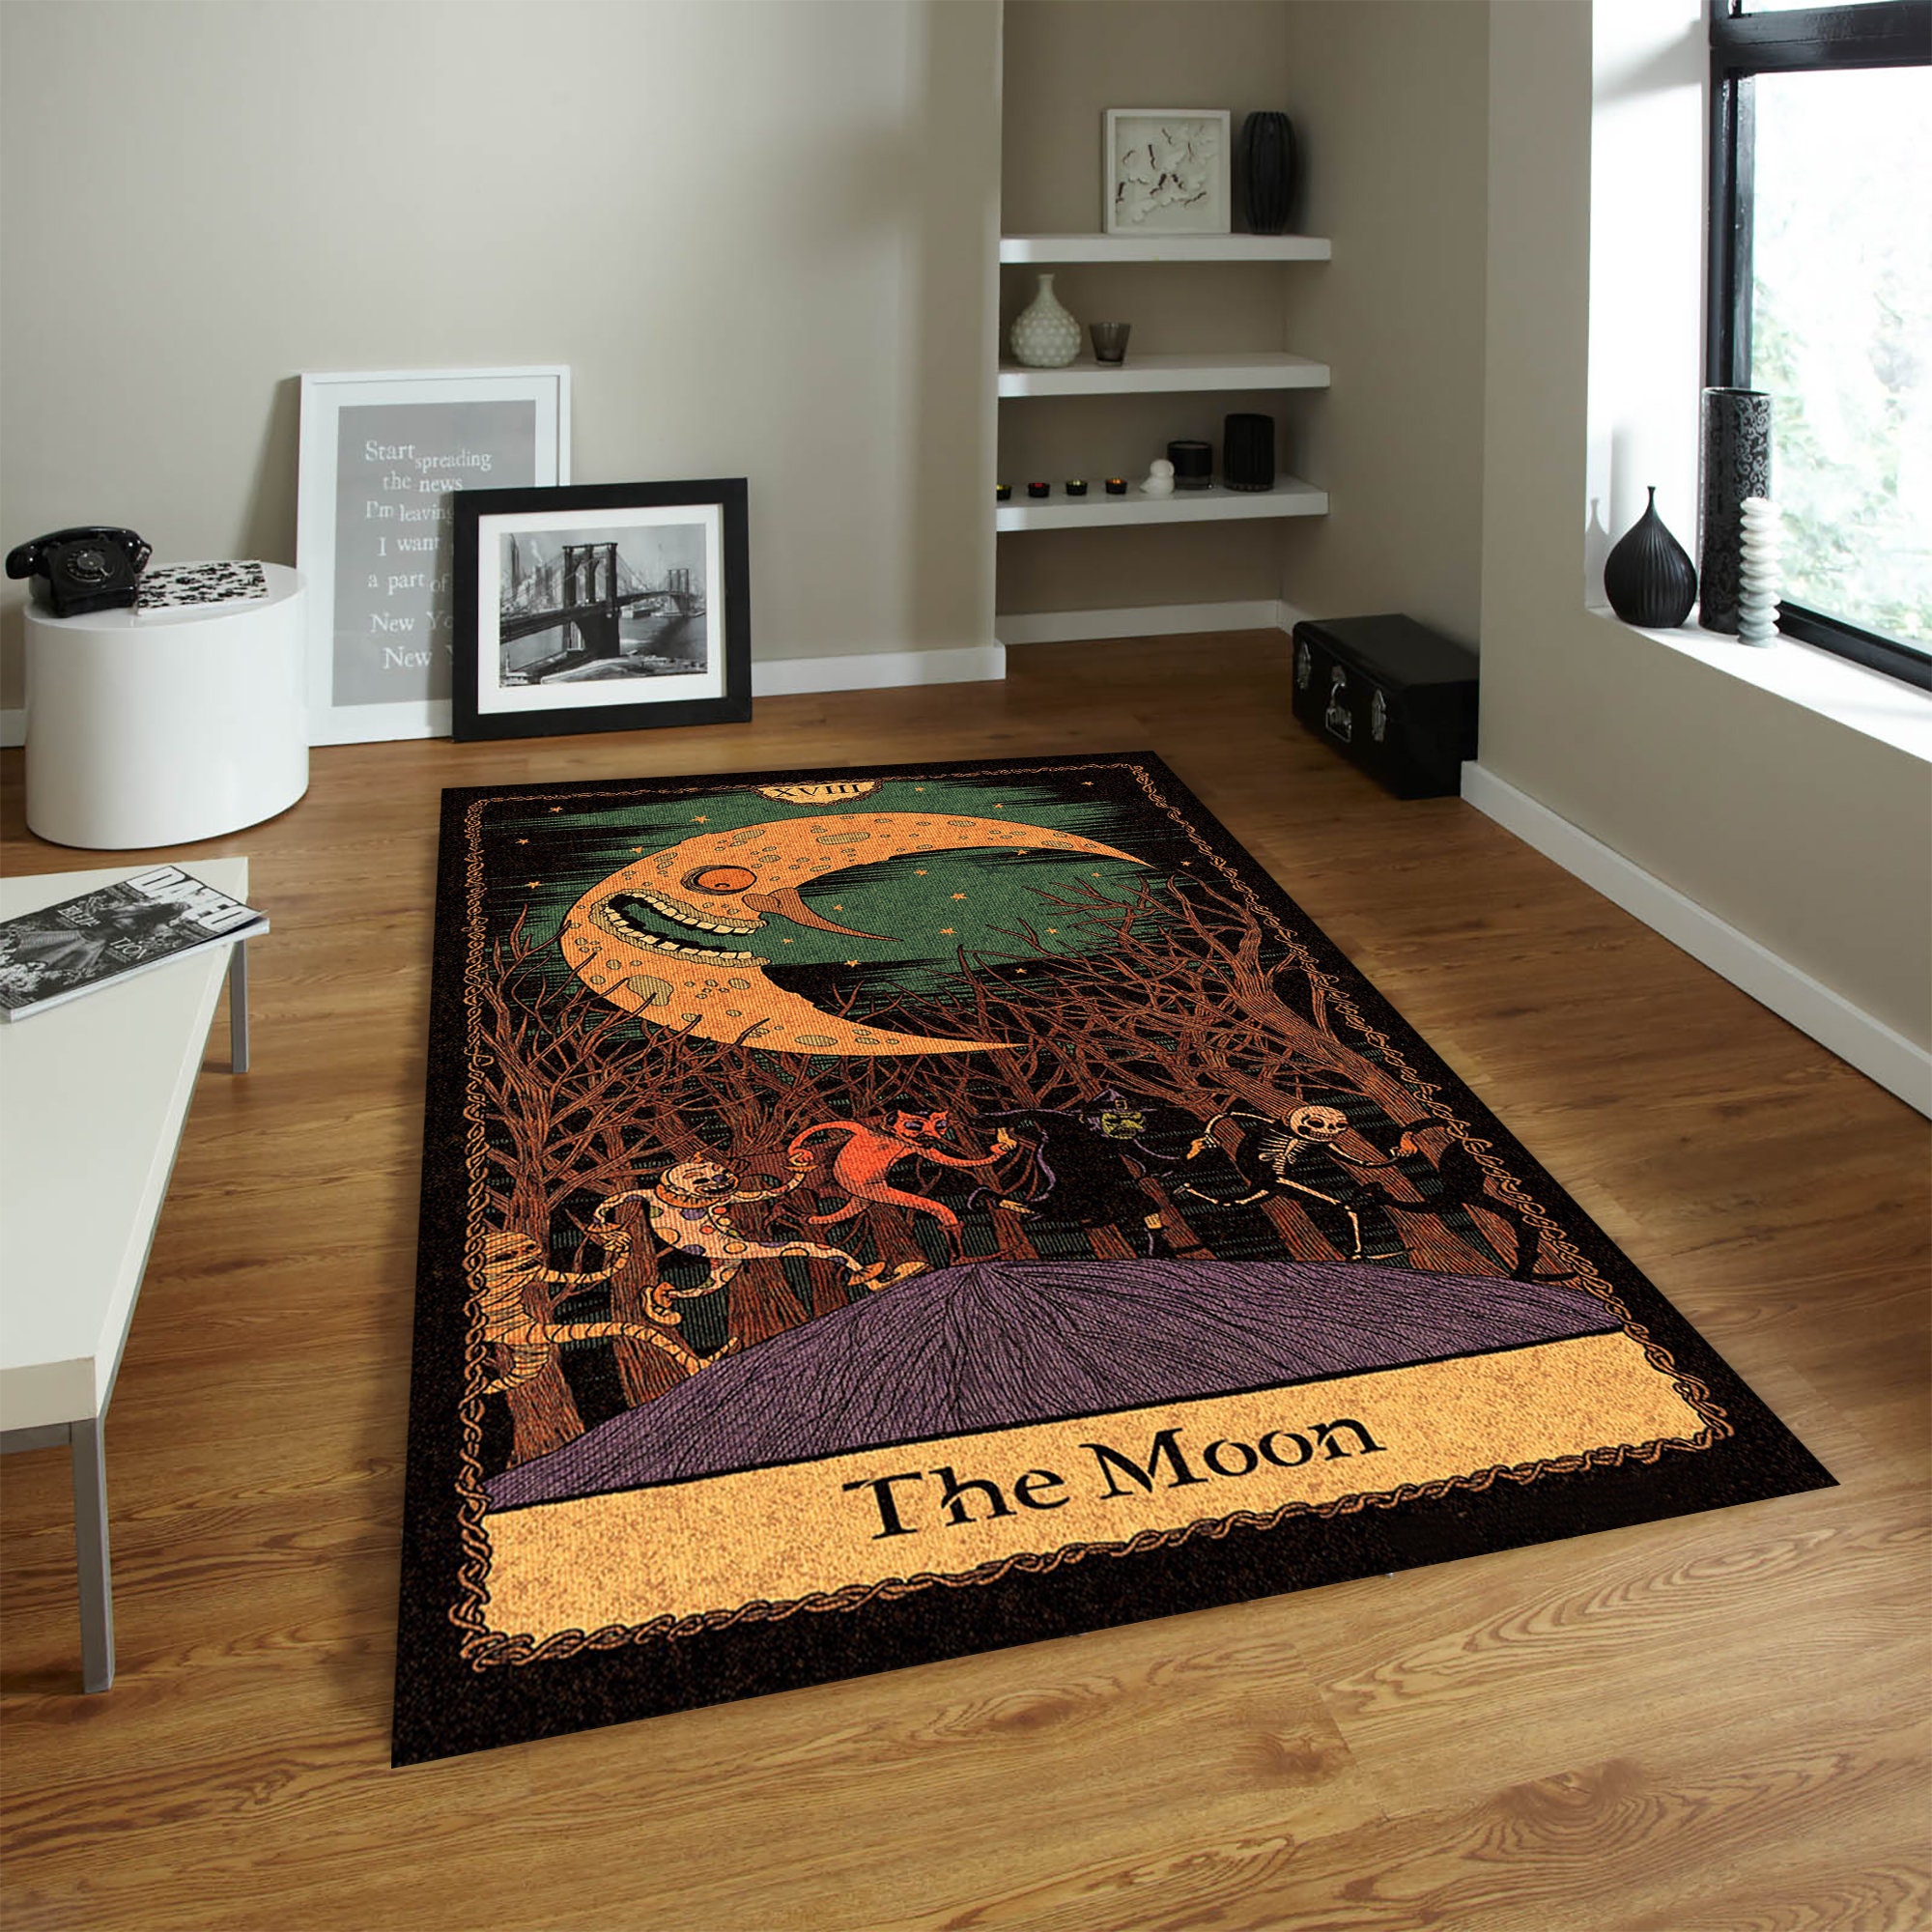 Spider Rugs for Entryway Bedroom Living Room, Halloween Scary 2x3 Rug,  Washable Non-Slip Soft Low Pile Area Rug, Dorm Dining Room Nursery Carpet